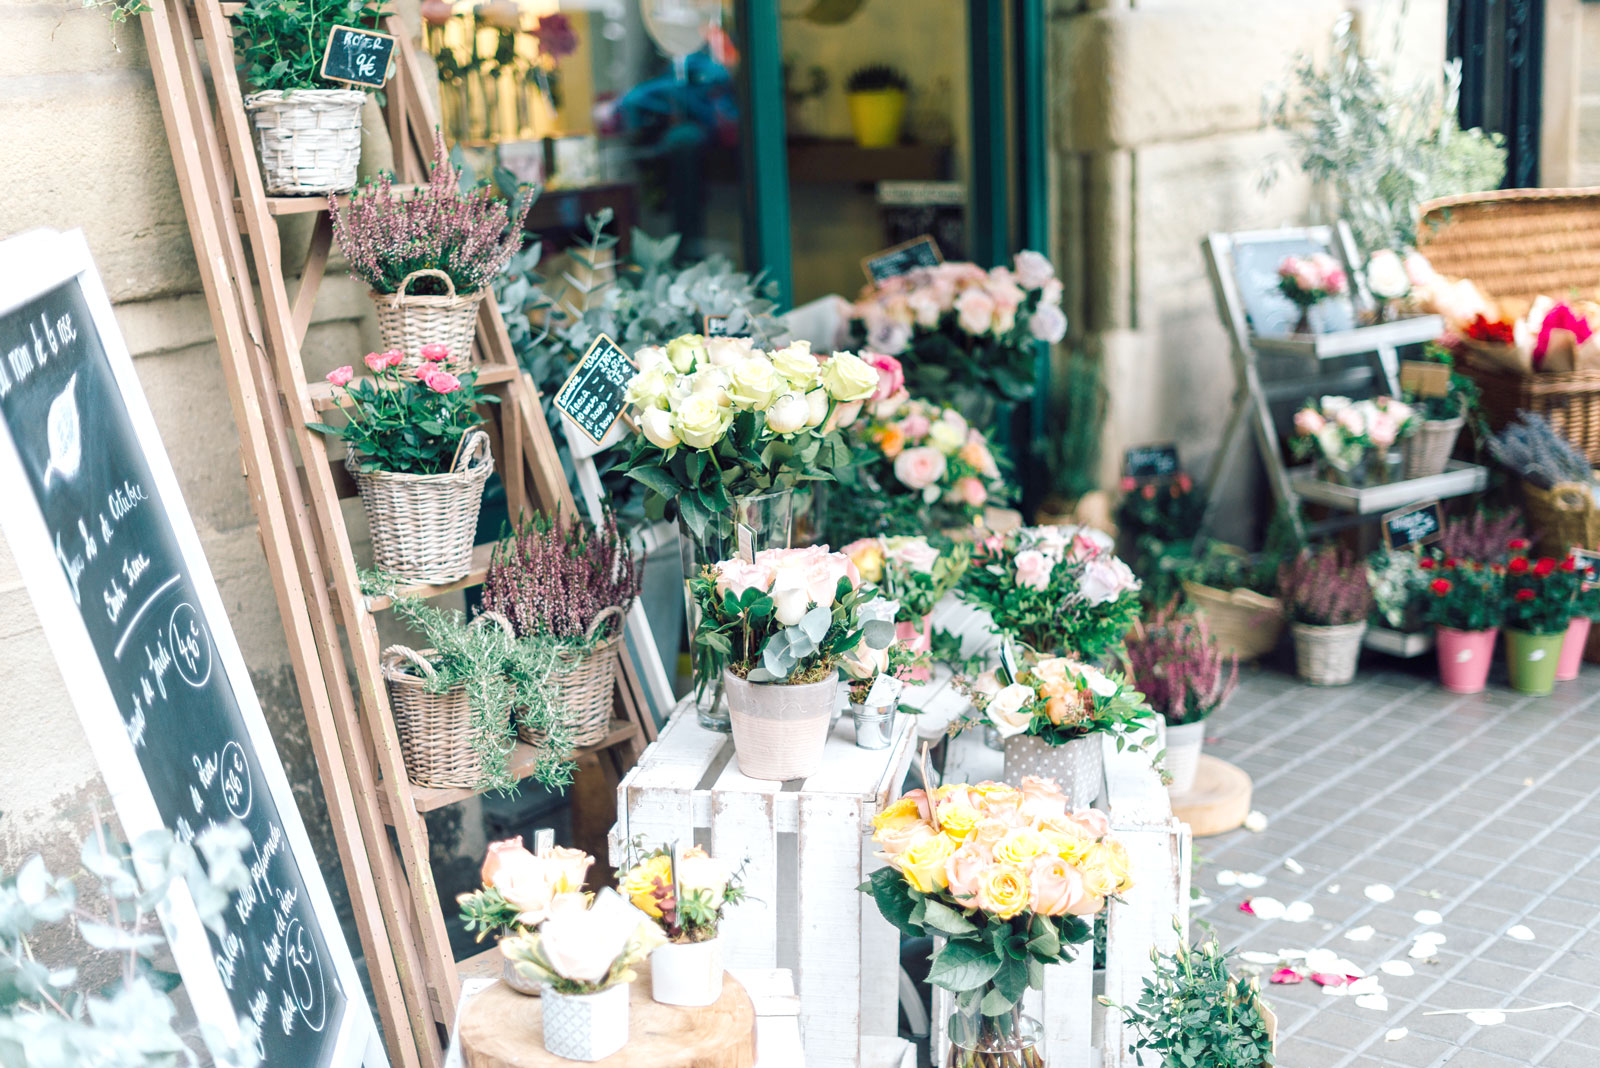 Willows Florist in Reigate